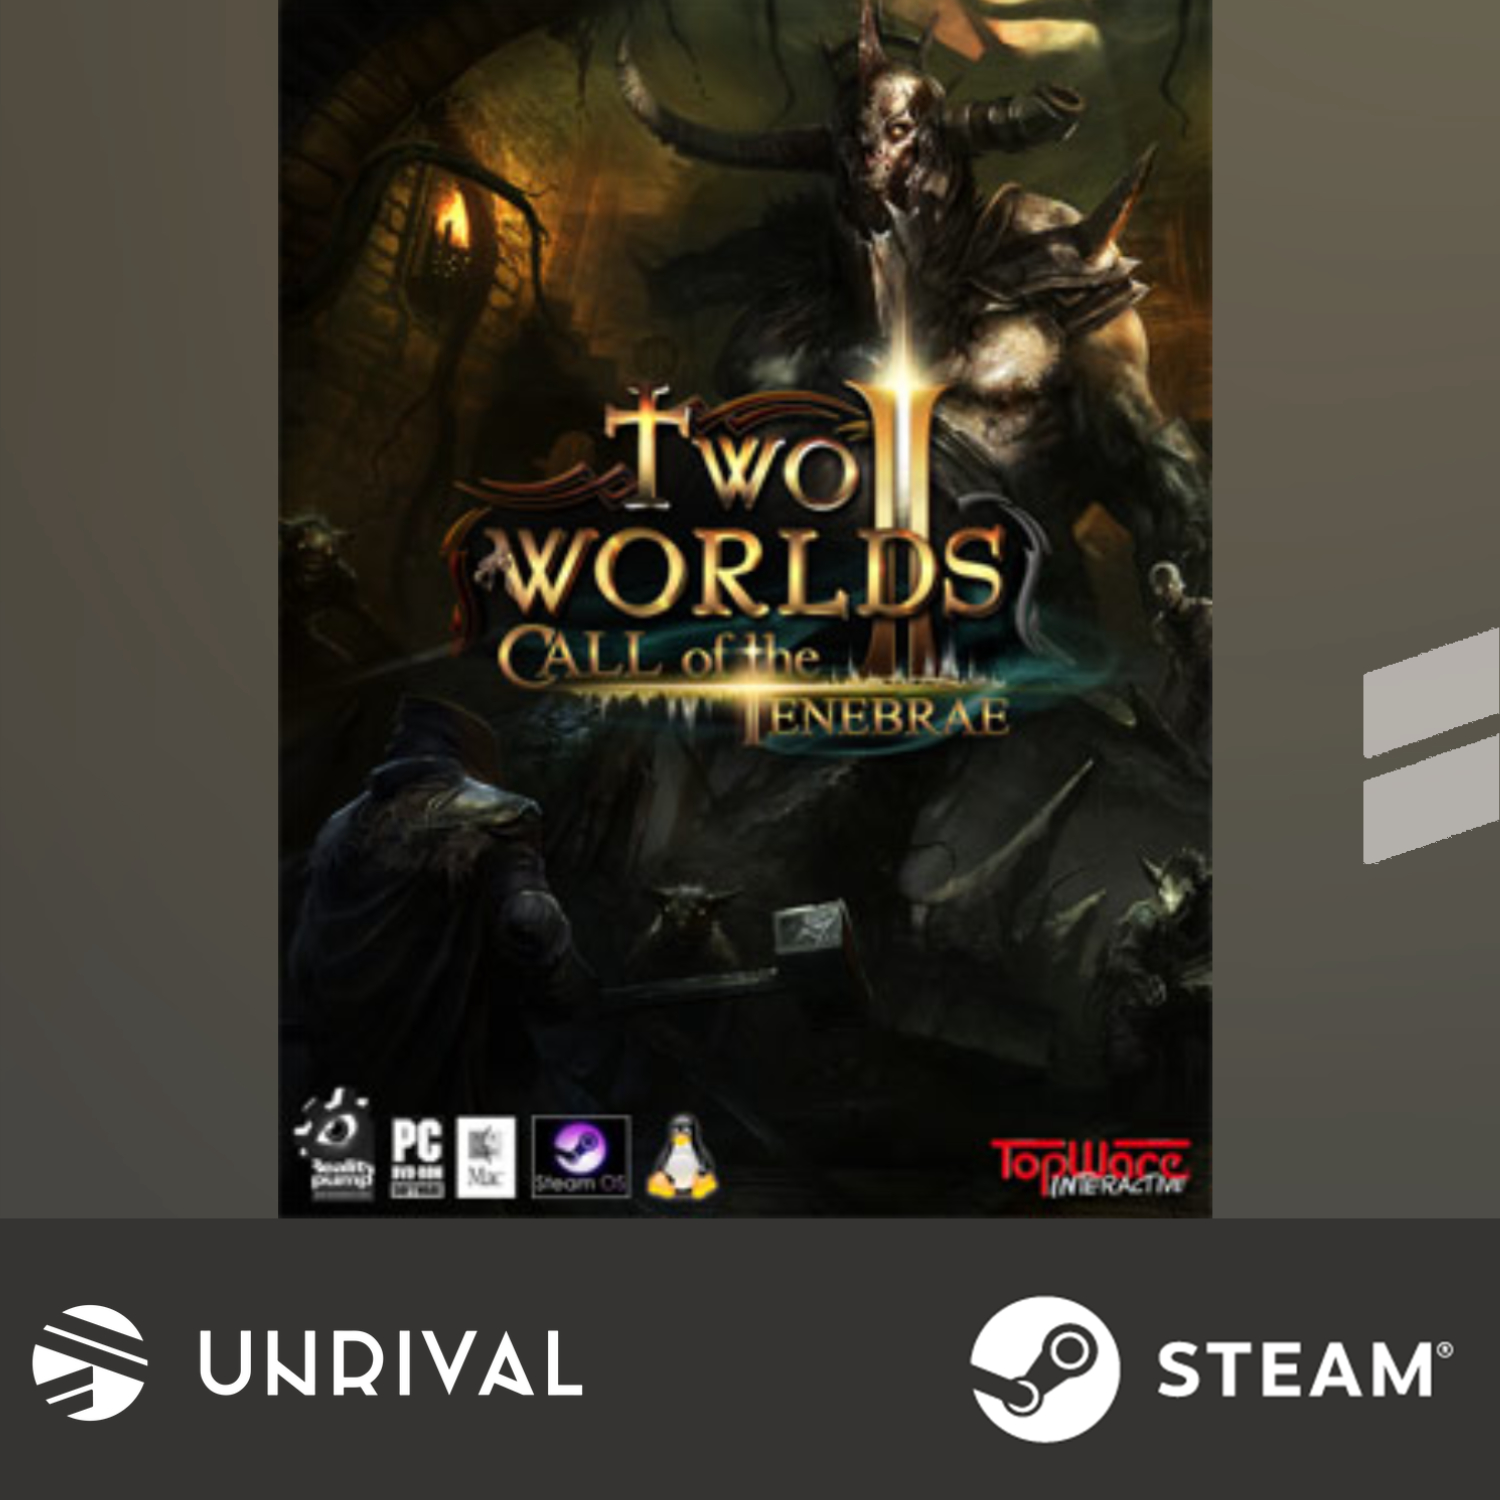 Two Worlds II - Call of the Tenebrae (DLC) PC Digital Download Game - Unrival